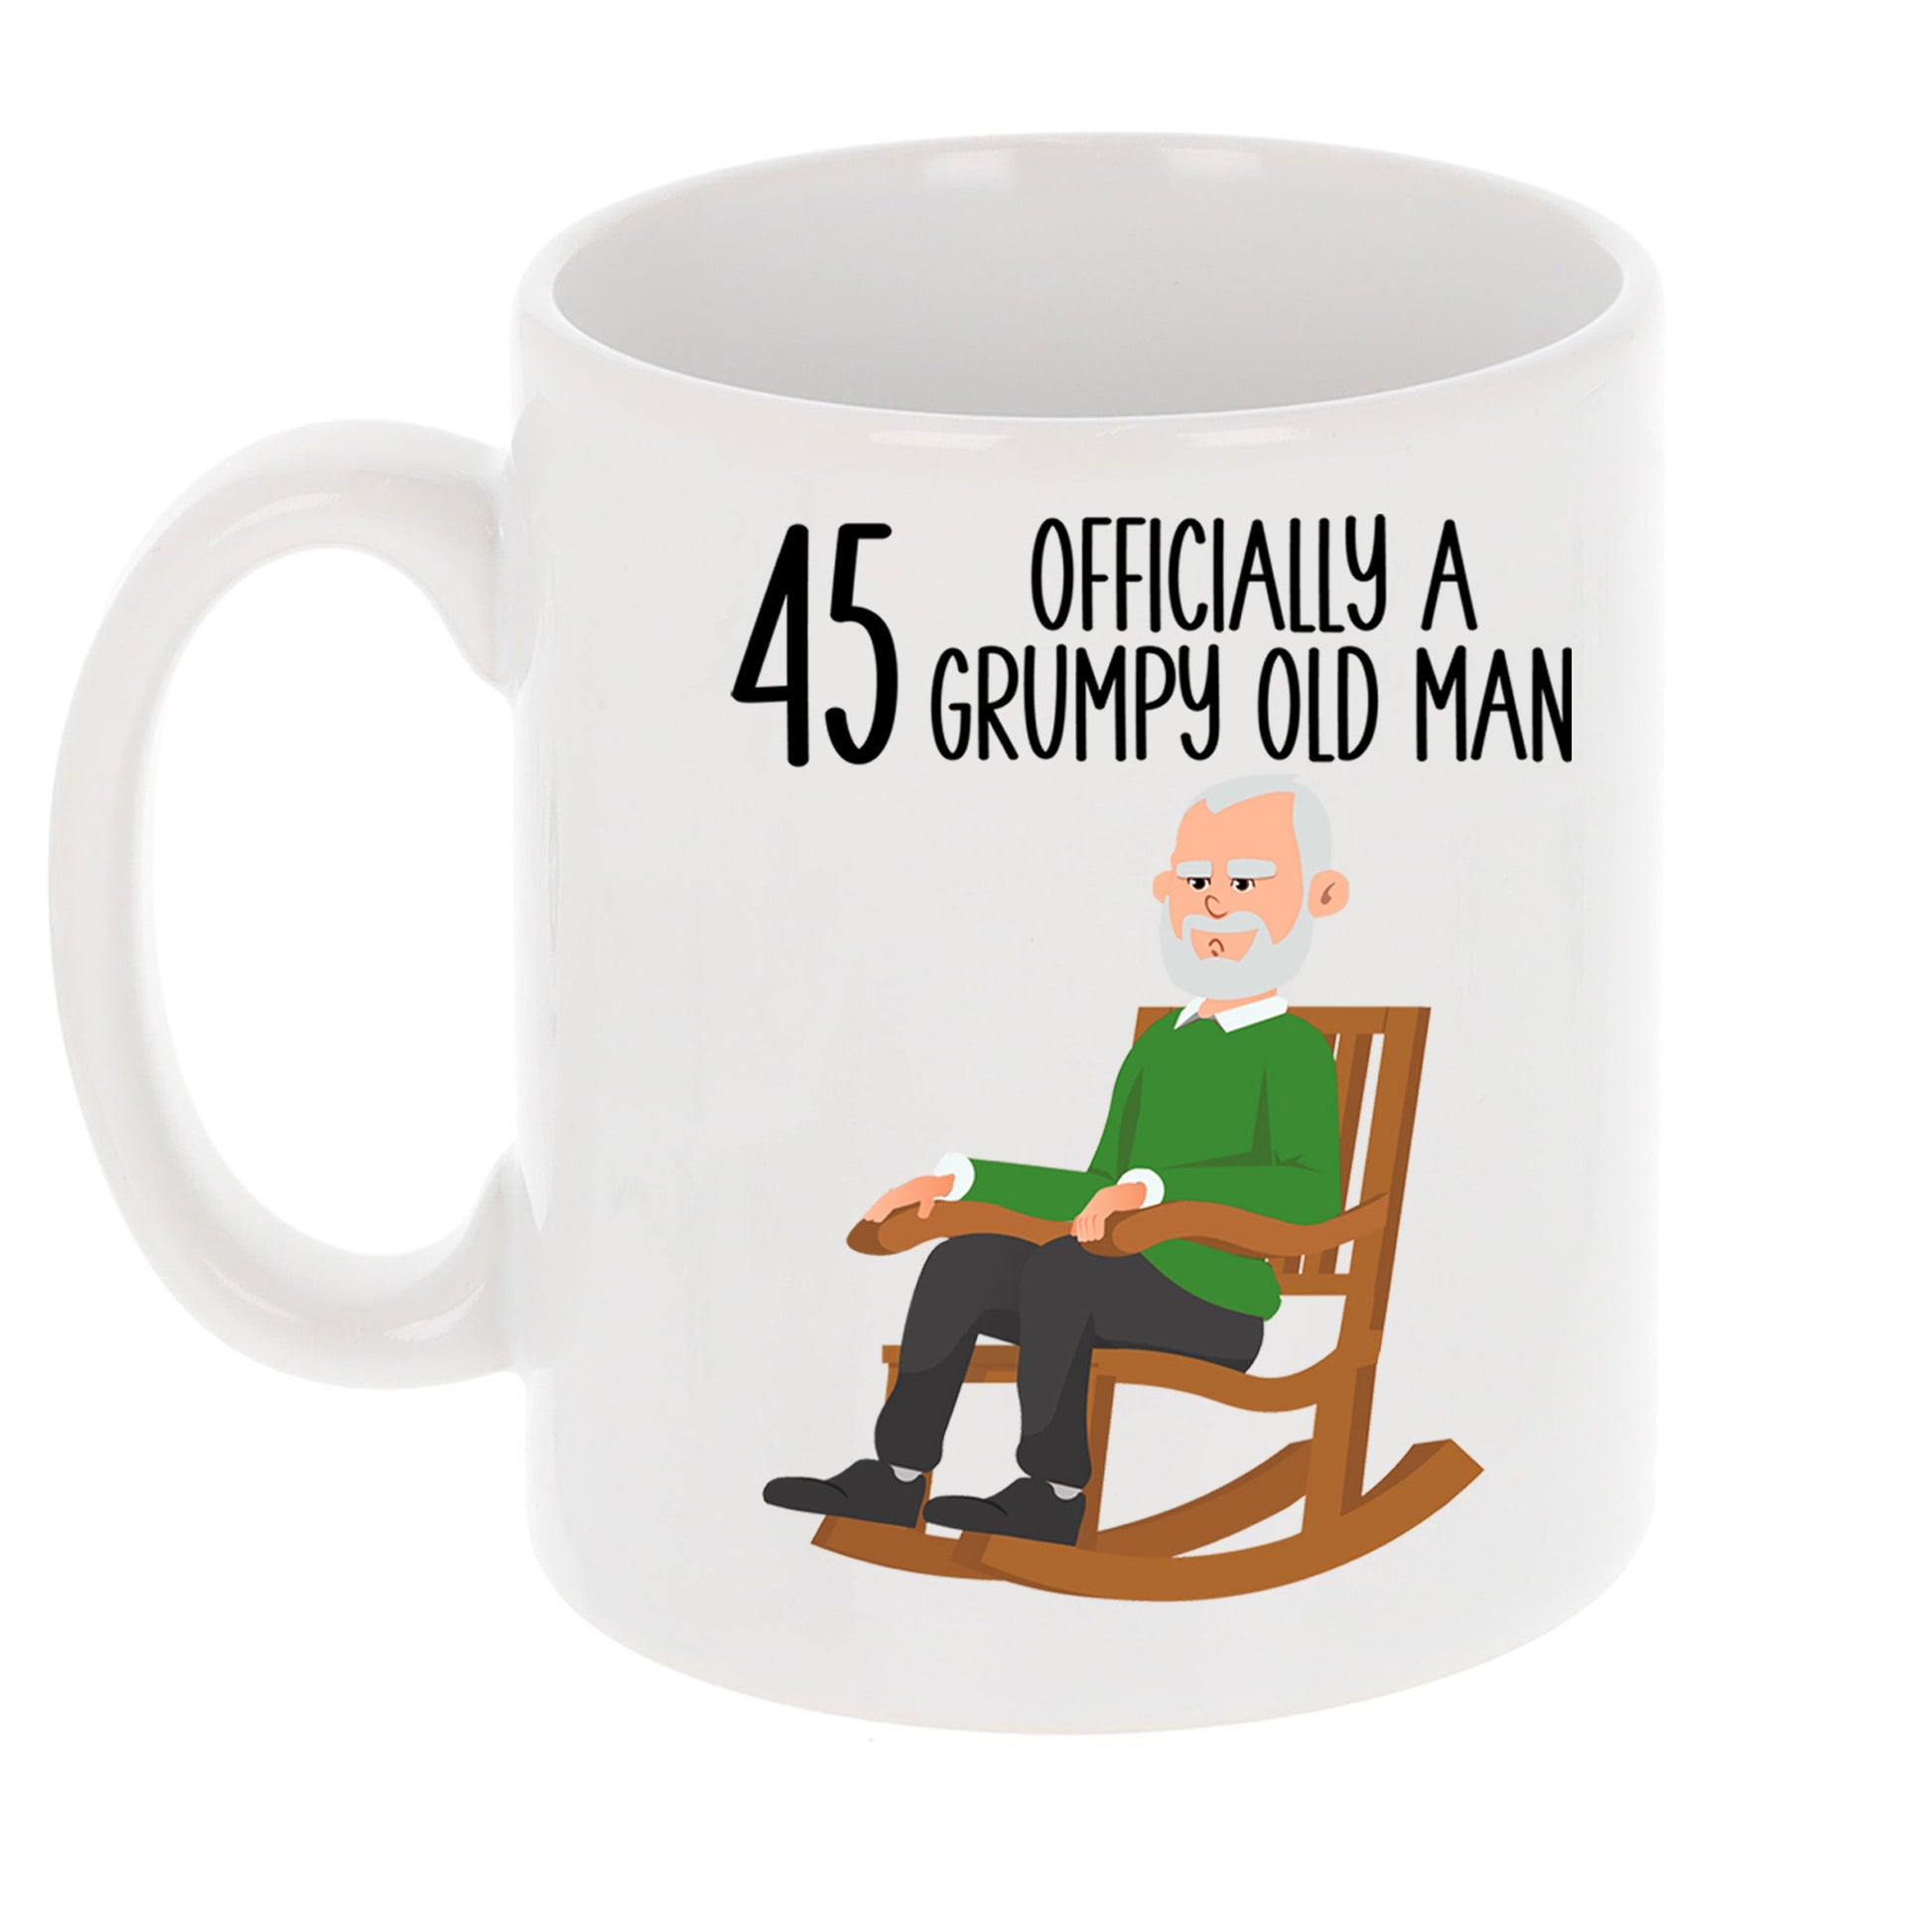 45 Officially A Grumpy Old Man Mug and/or Coaster Gift  - Always Looking Good - Mug On Its Own  